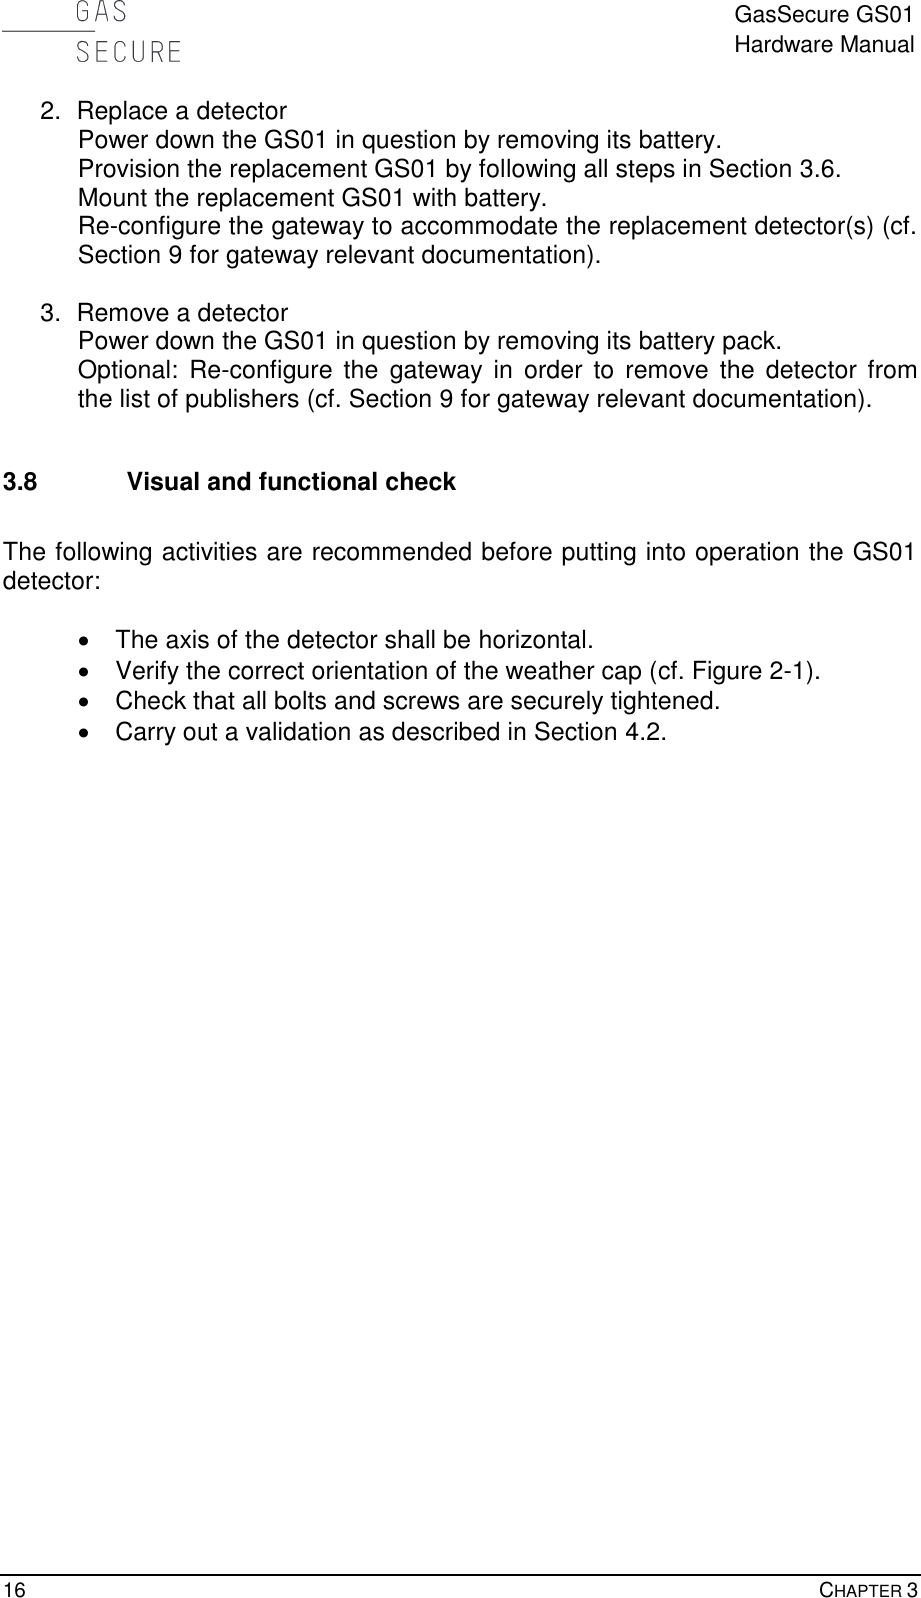  GasSecure GS01 Hardware Manual  16    CHAPTER 3 2.  Replace a detector Power down the GS01 in question by removing its battery. Provision the replacement GS01 by following all steps in Section 3.6. Mount the replacement GS01 with battery. Re-configure the gateway to accommodate the replacement detector(s) (cf. Section 9 for gateway relevant documentation).  3.  Remove a detector Power down the GS01 in question by removing its battery pack. Optional:  Re-configure  the  gateway  in  order to  remove  the  detector from the list of publishers (cf. Section 9 for gateway relevant documentation).  3.8 Visual and functional check  The following activities are recommended before putting into operation the GS01 detector:    The axis of the detector shall be horizontal.   Verify the correct orientation of the weather cap (cf. Figure 2-1).   Check that all bolts and screws are securely tightened.   Carry out a validation as described in Section 4.2. 